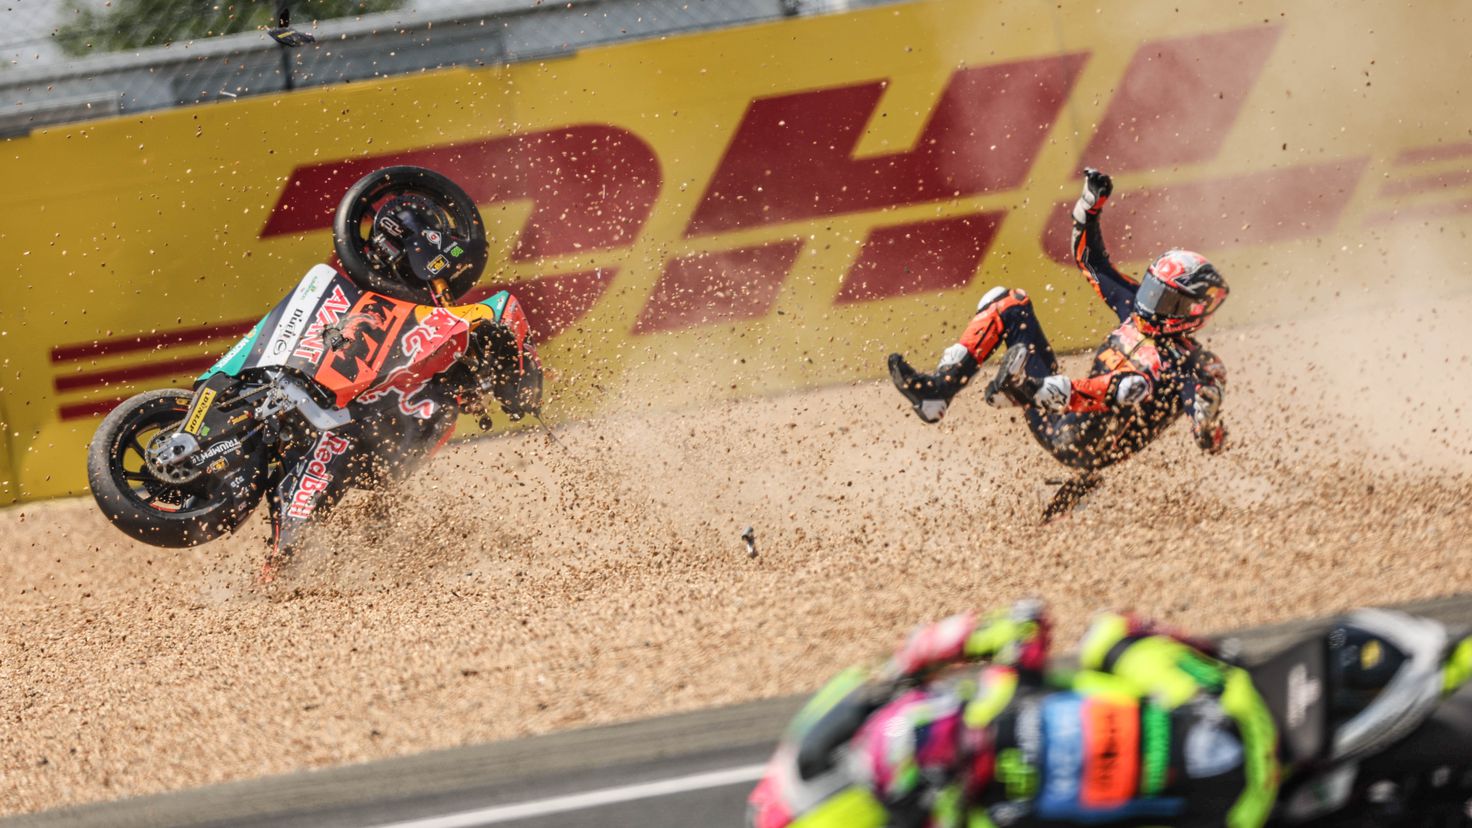 Acosta falls again at Le Mans fighting for victory 
